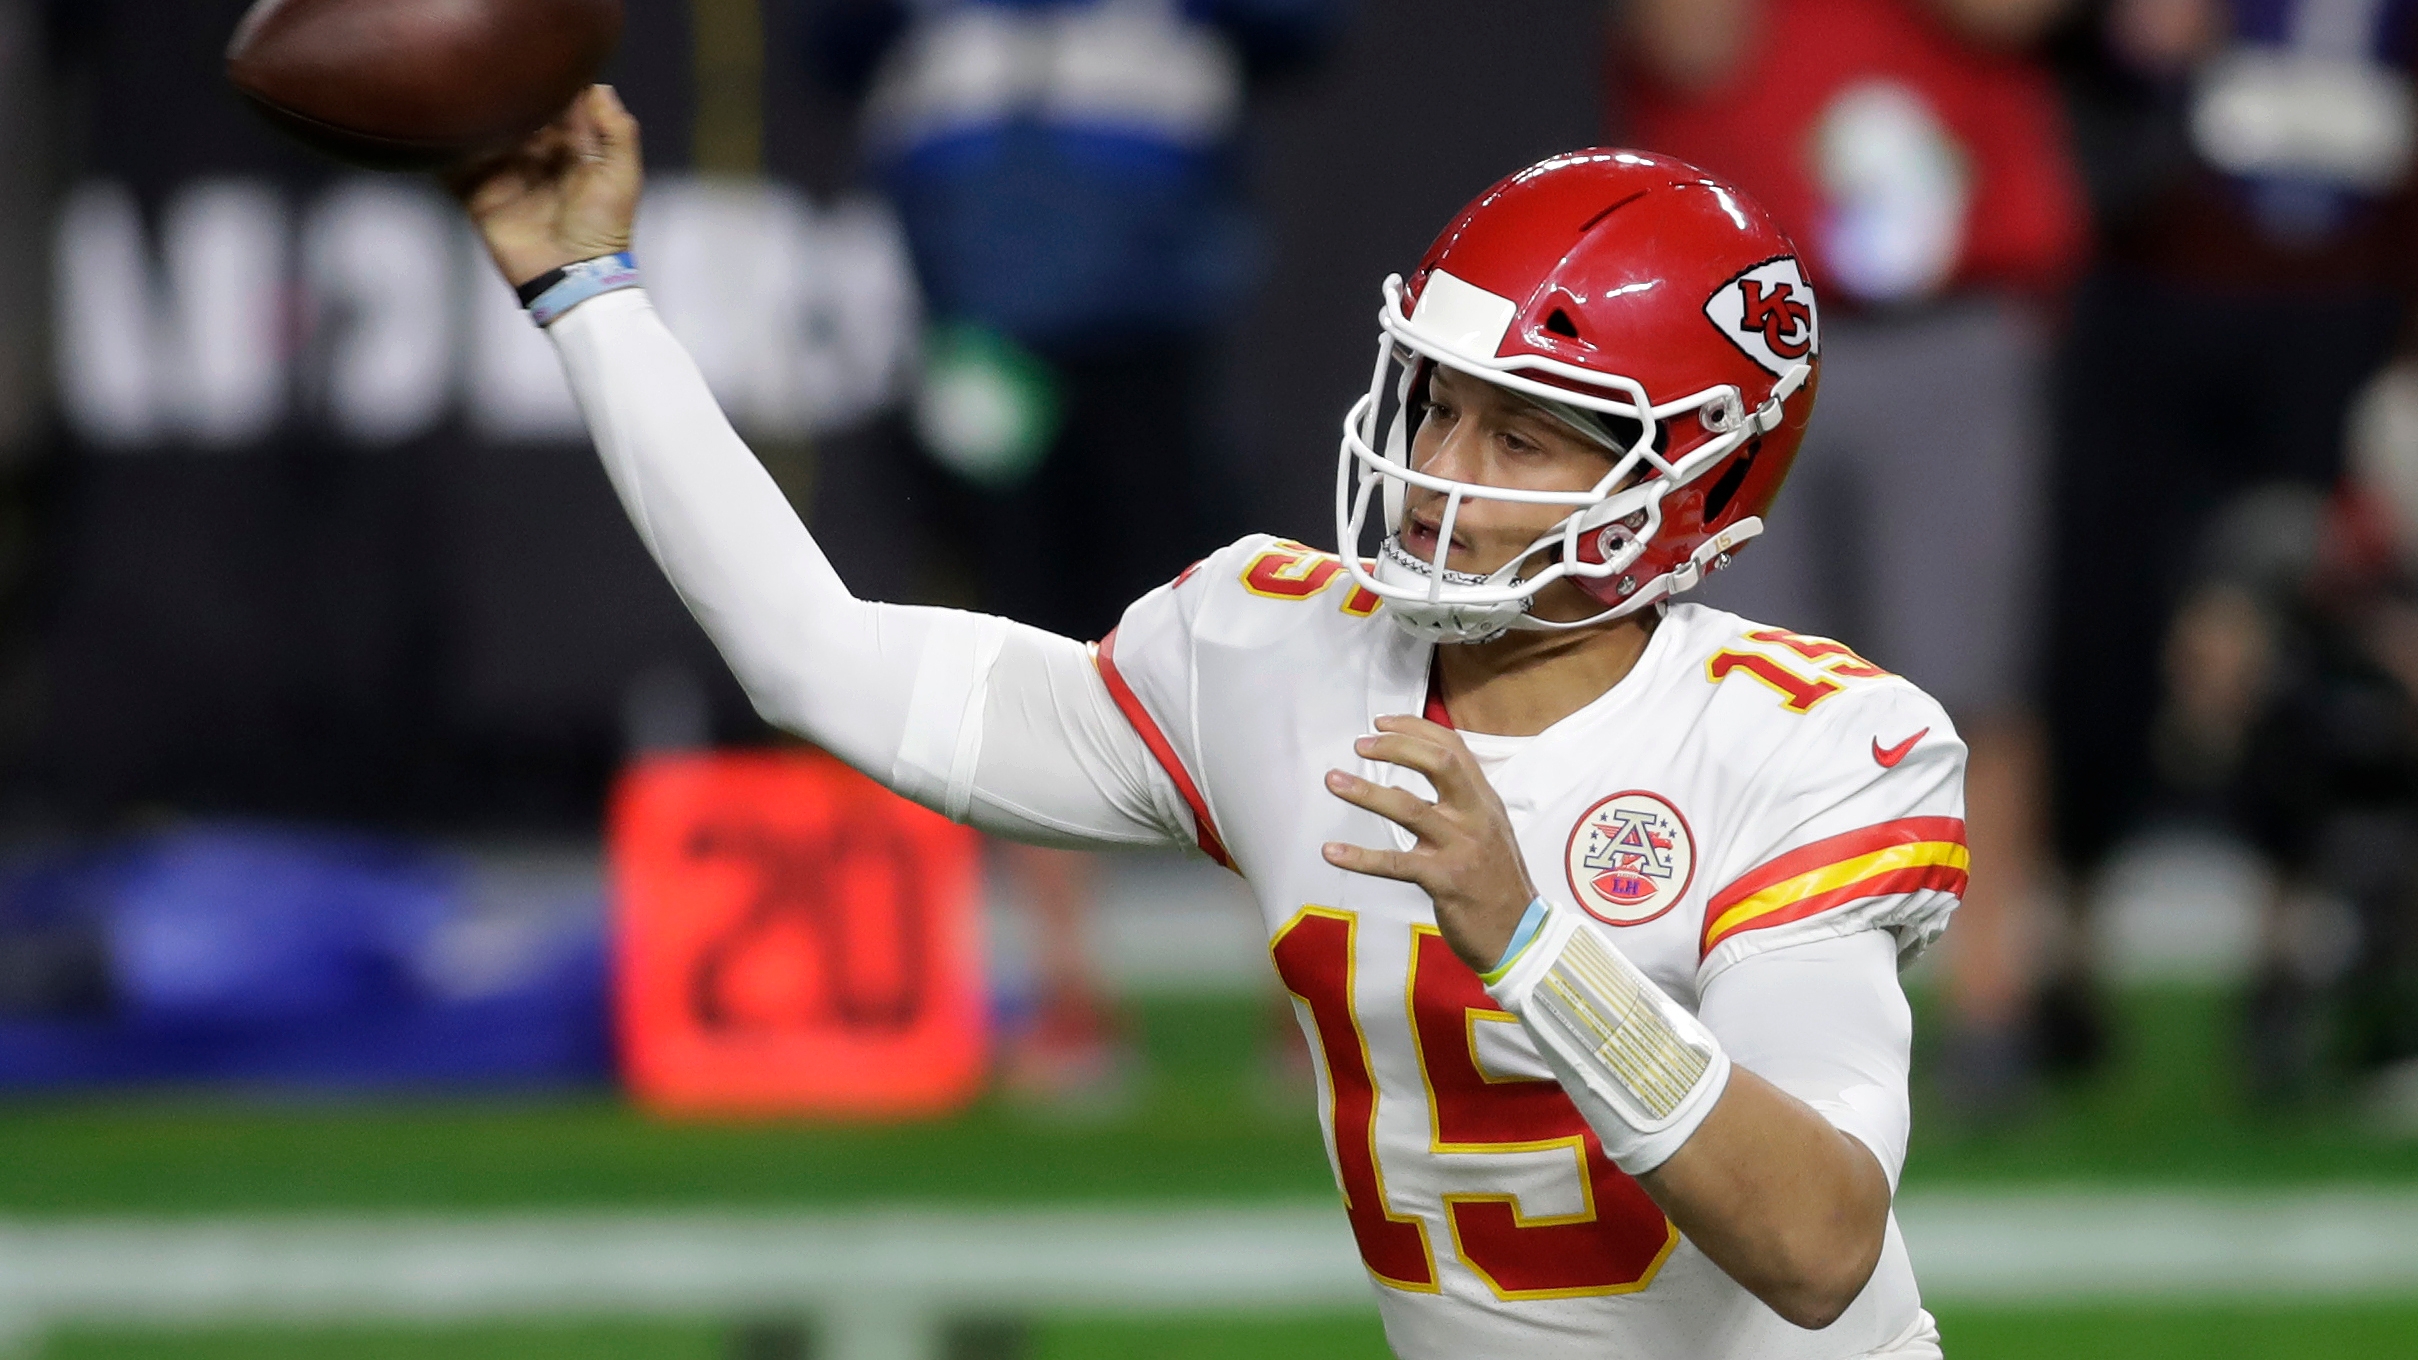 Chiefs' Patrick Mahomes asks Steelers' Ben Roethlisberger for a jersey